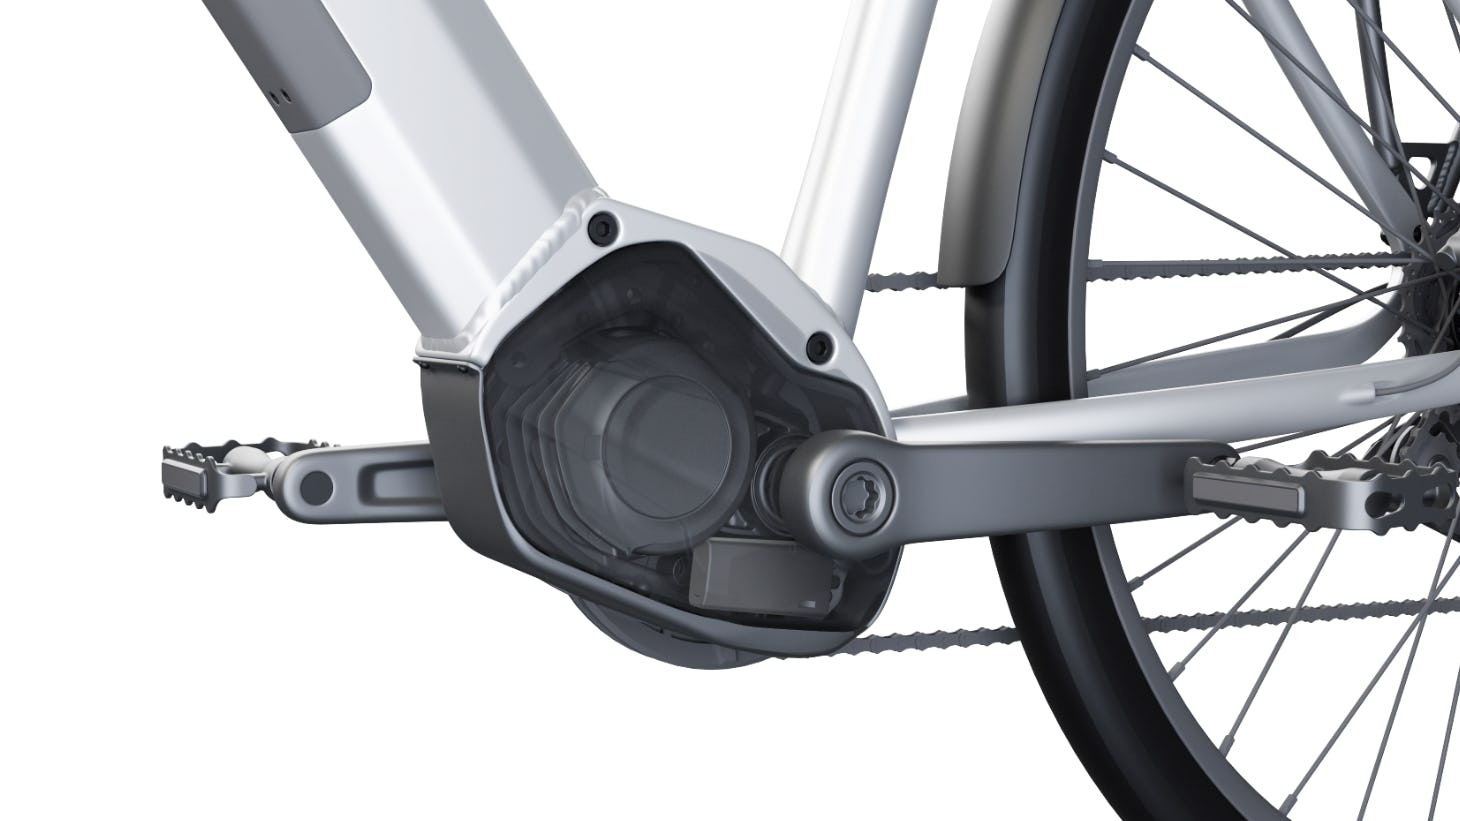 The IoT module can be hidden under the drive cover or secured to the bike frame under a customised enclosure. – Photo Comodule